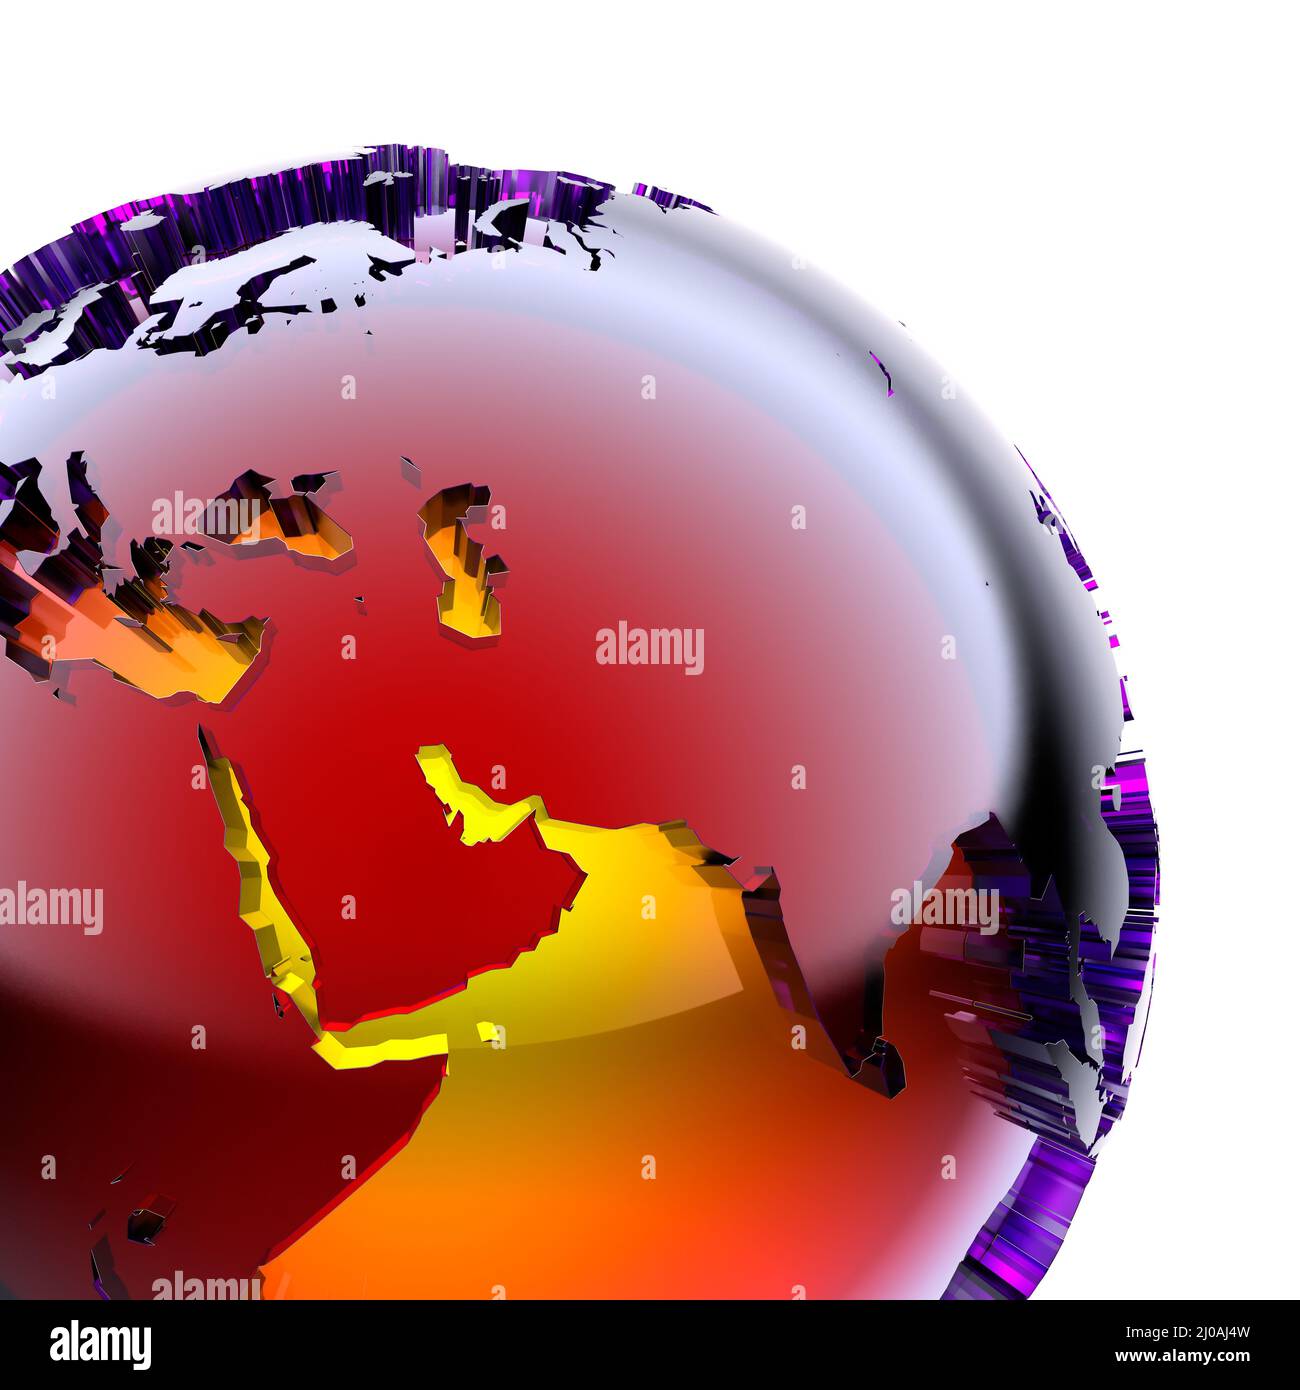 Globe of colored glass with an inner warm glow Stock Photo